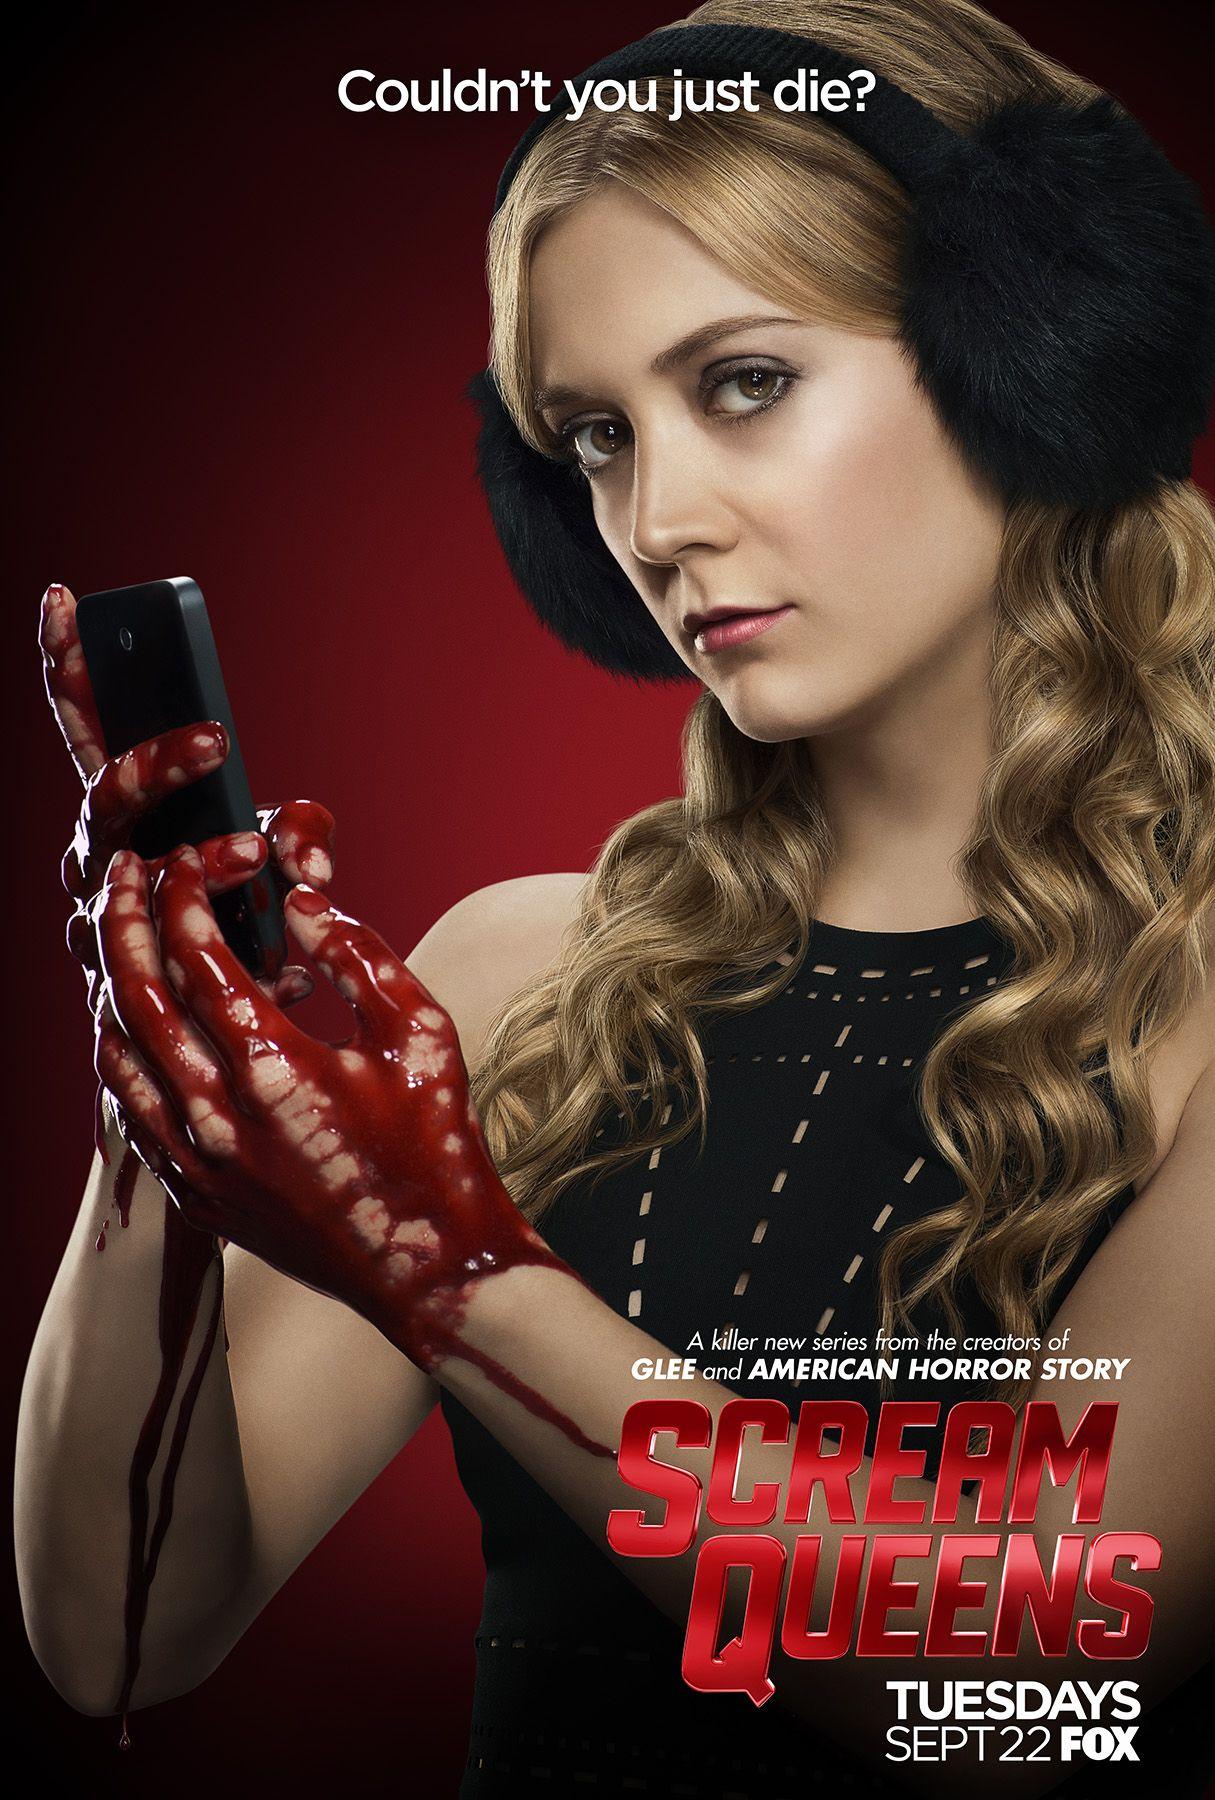 Check out Everyone has blood on their hands. Scream queens